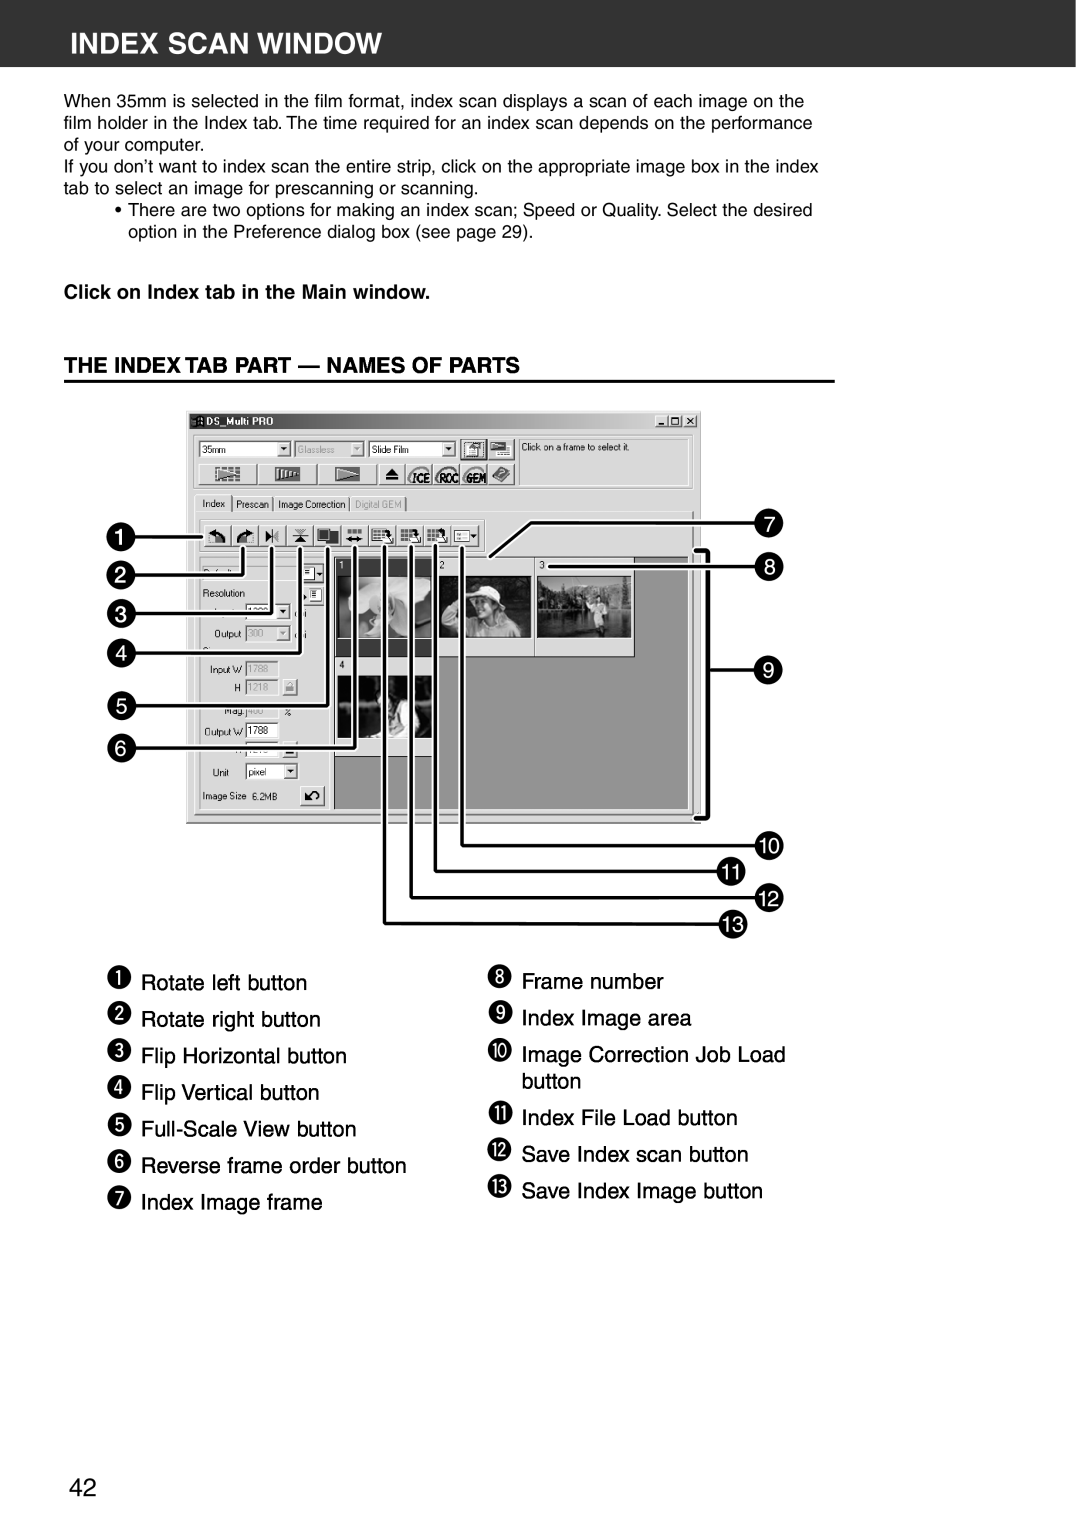 Konica Minolta Scan Multi PRO instruction manual Index Scan Window, The Index Tab Part - Names Of Parts 